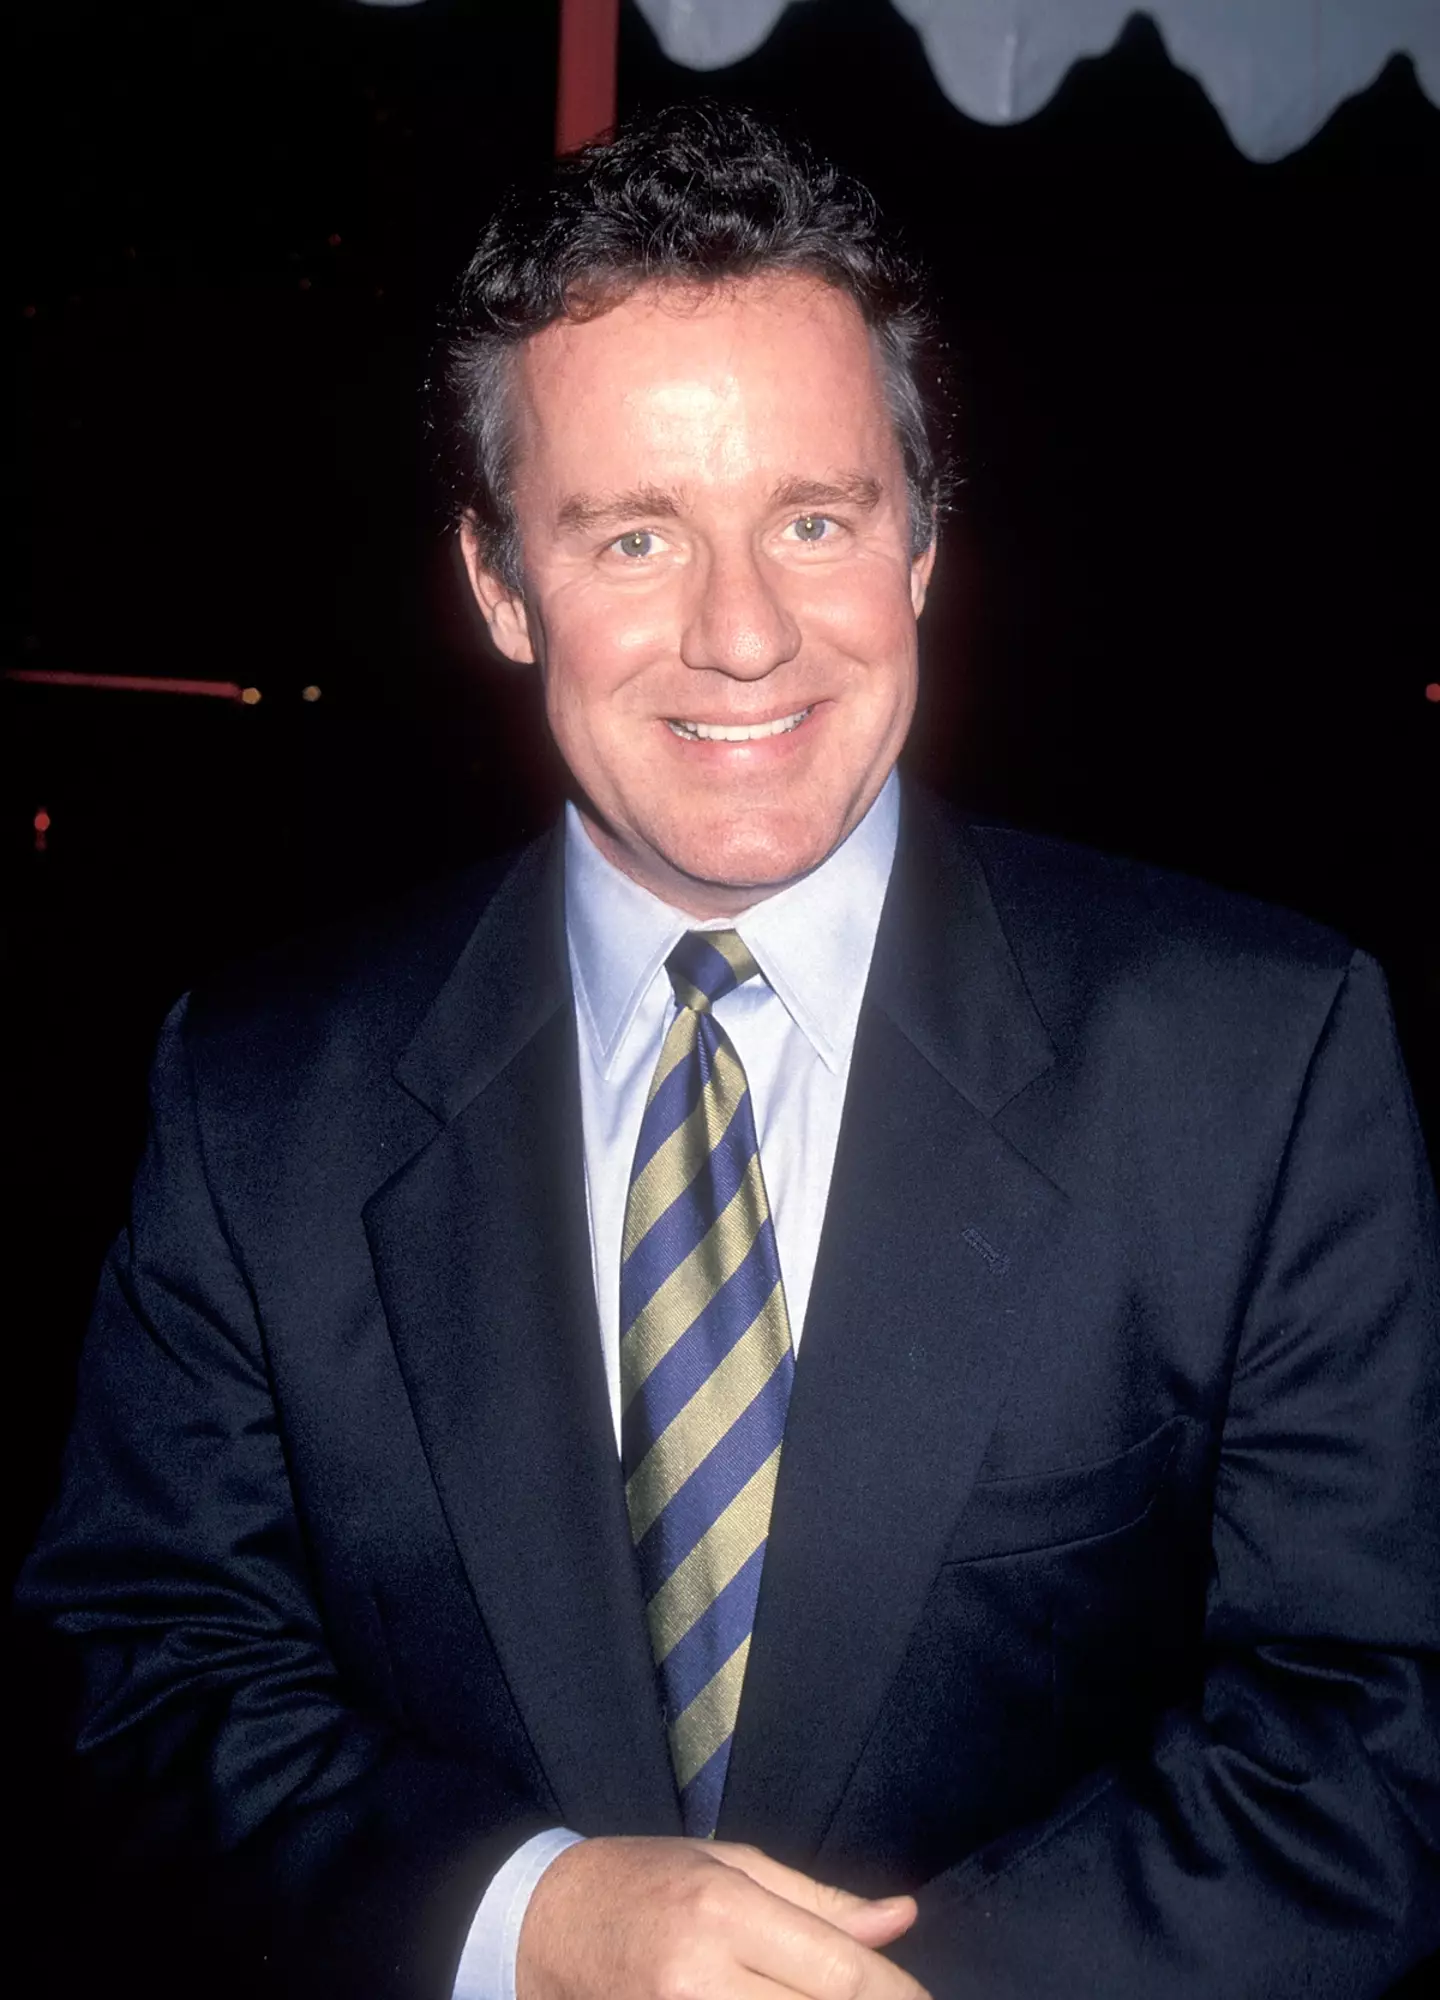 Phil Hartman was tragically murdered in 1998. (Ron Galella, Ltd./Ron Galella Collection via Getty Images)